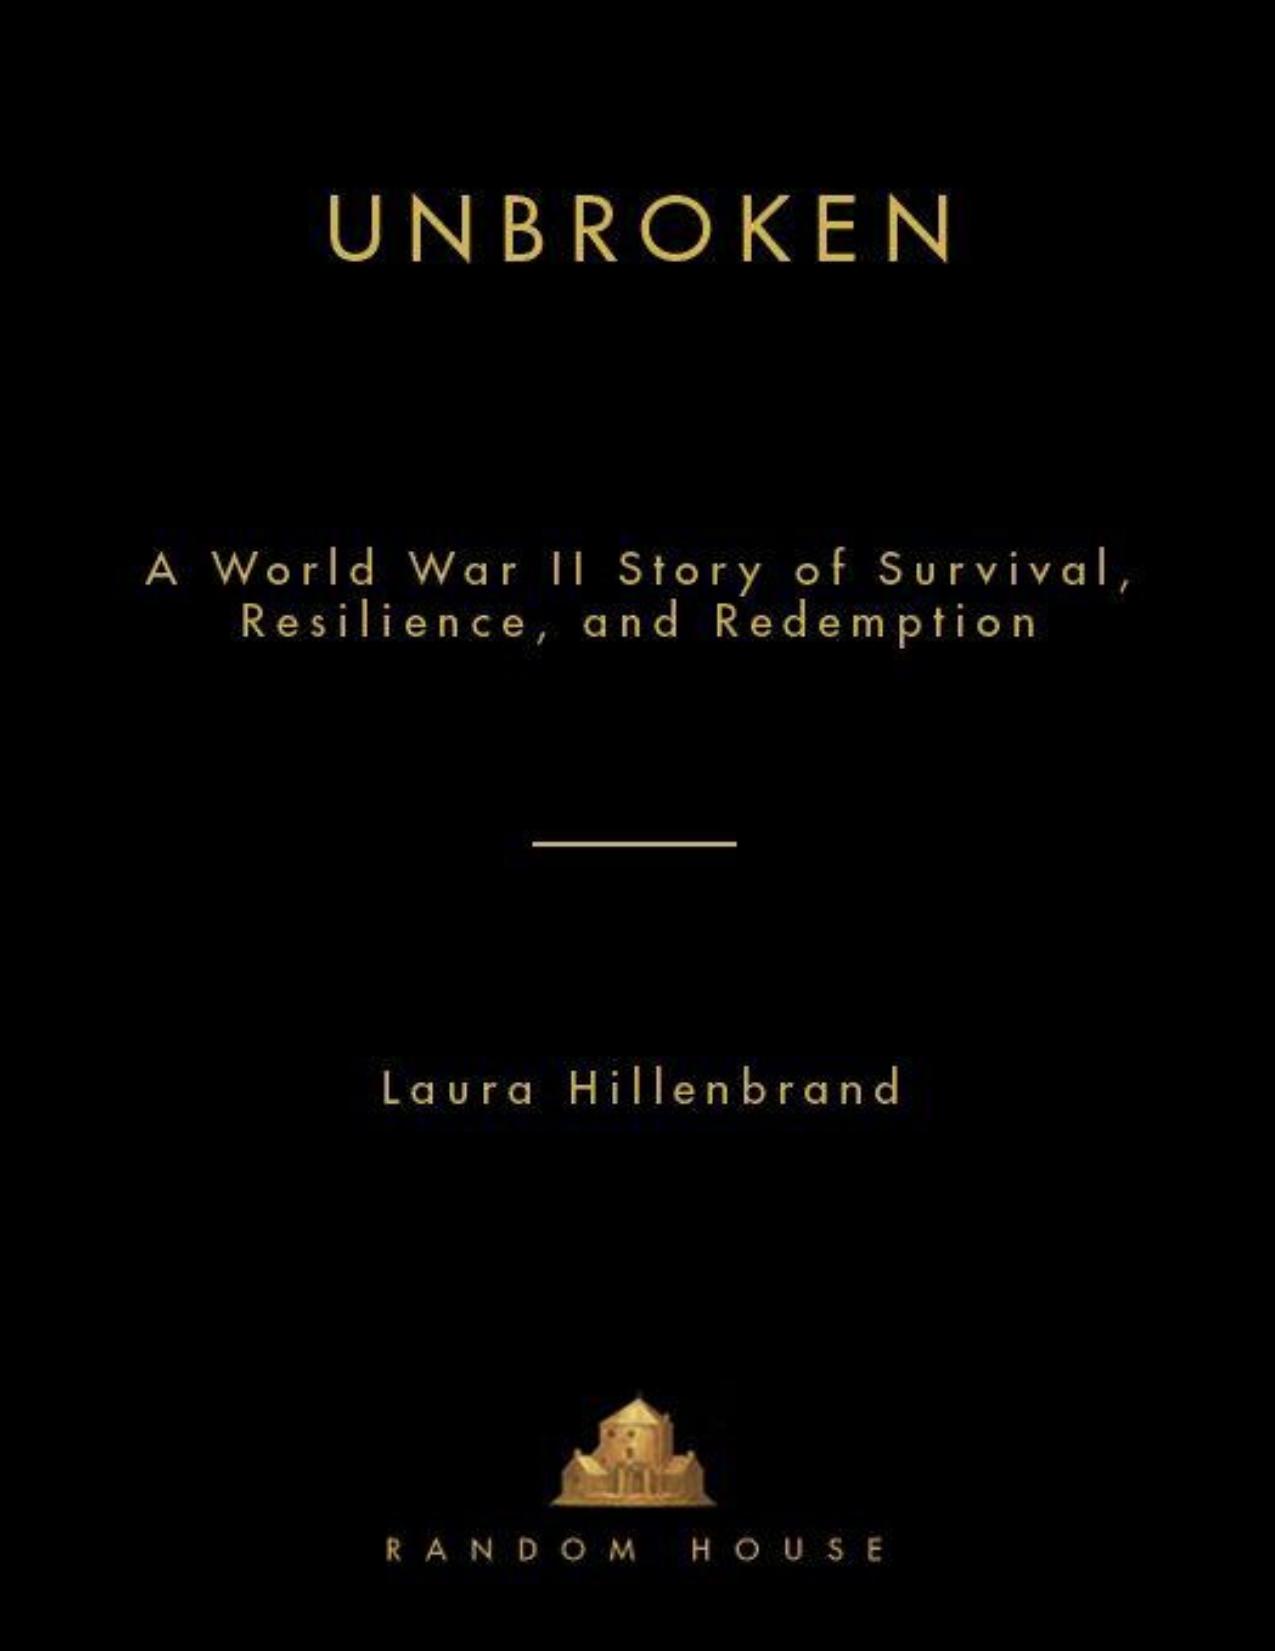 Unbroken: A World War II Story of Survival, Resilience, and Redemption by Hillenbrand Laura